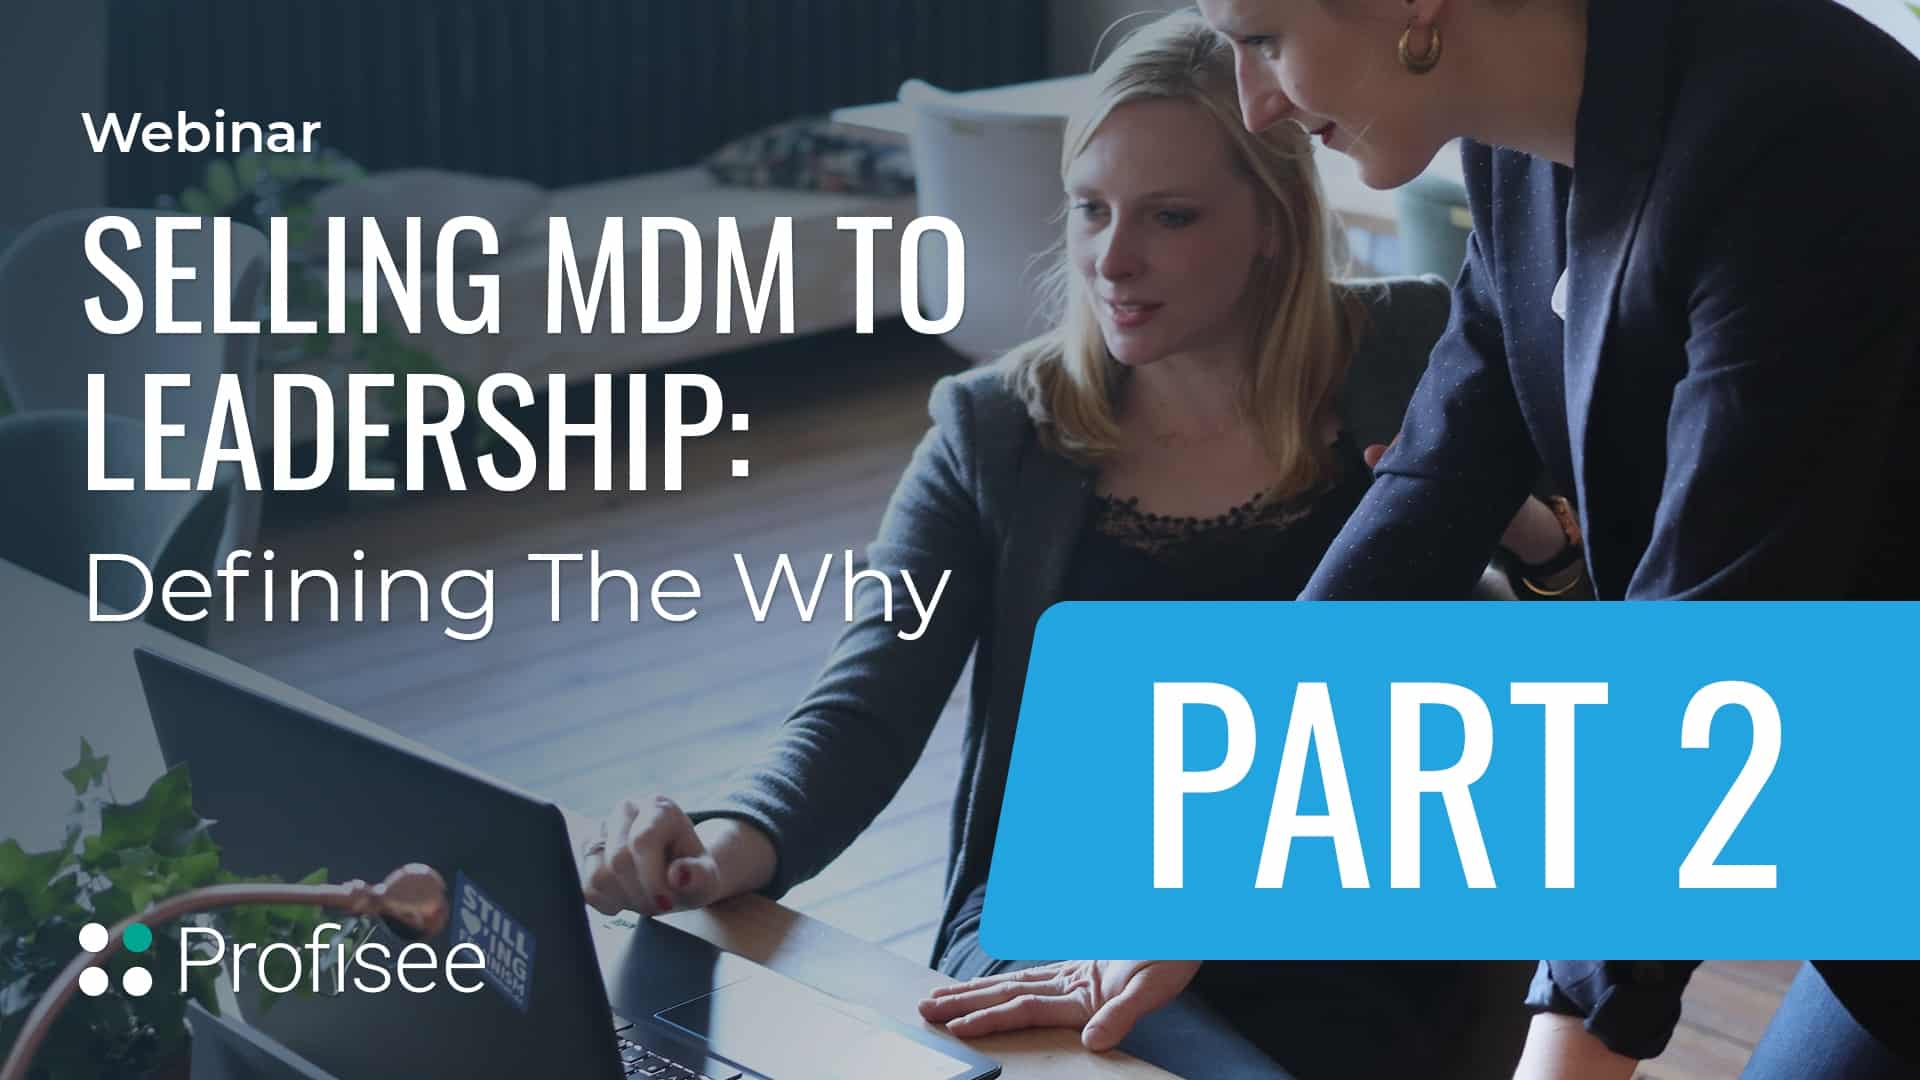 Profisee: Selling MDM to Leadership Pt. 2: Defining the Why